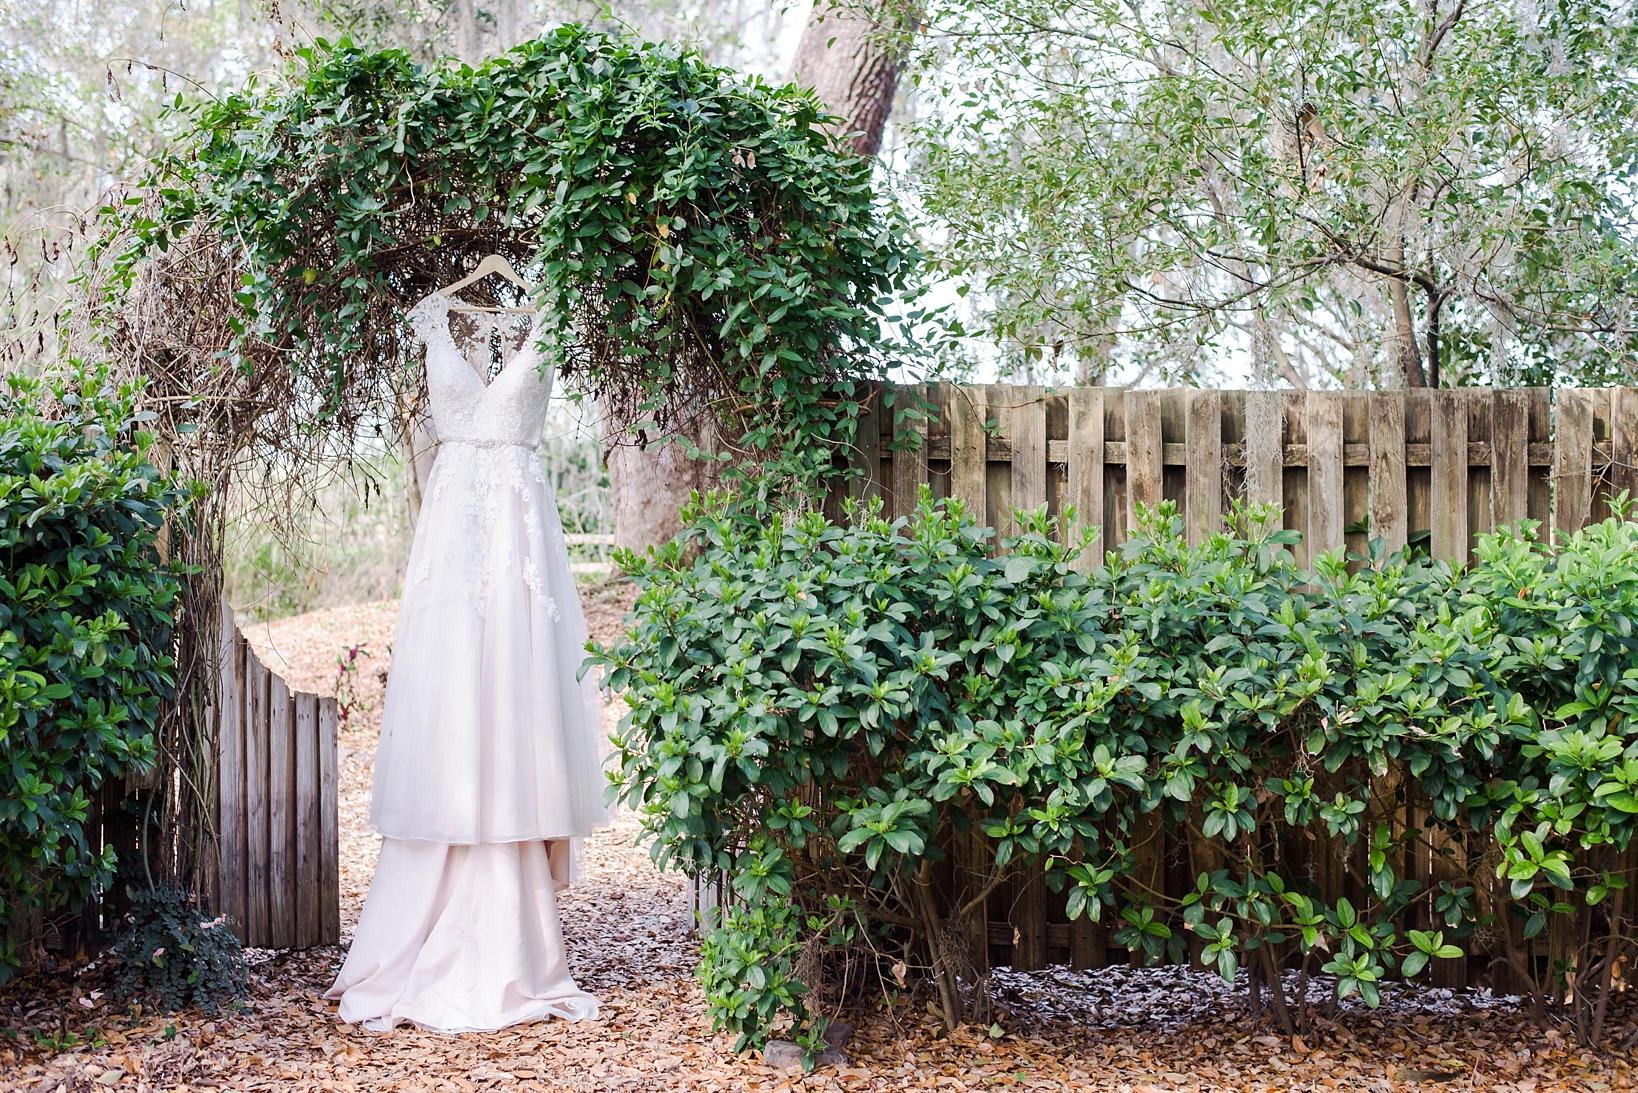 The wedding dress hanging in a rustic greenery filled arch